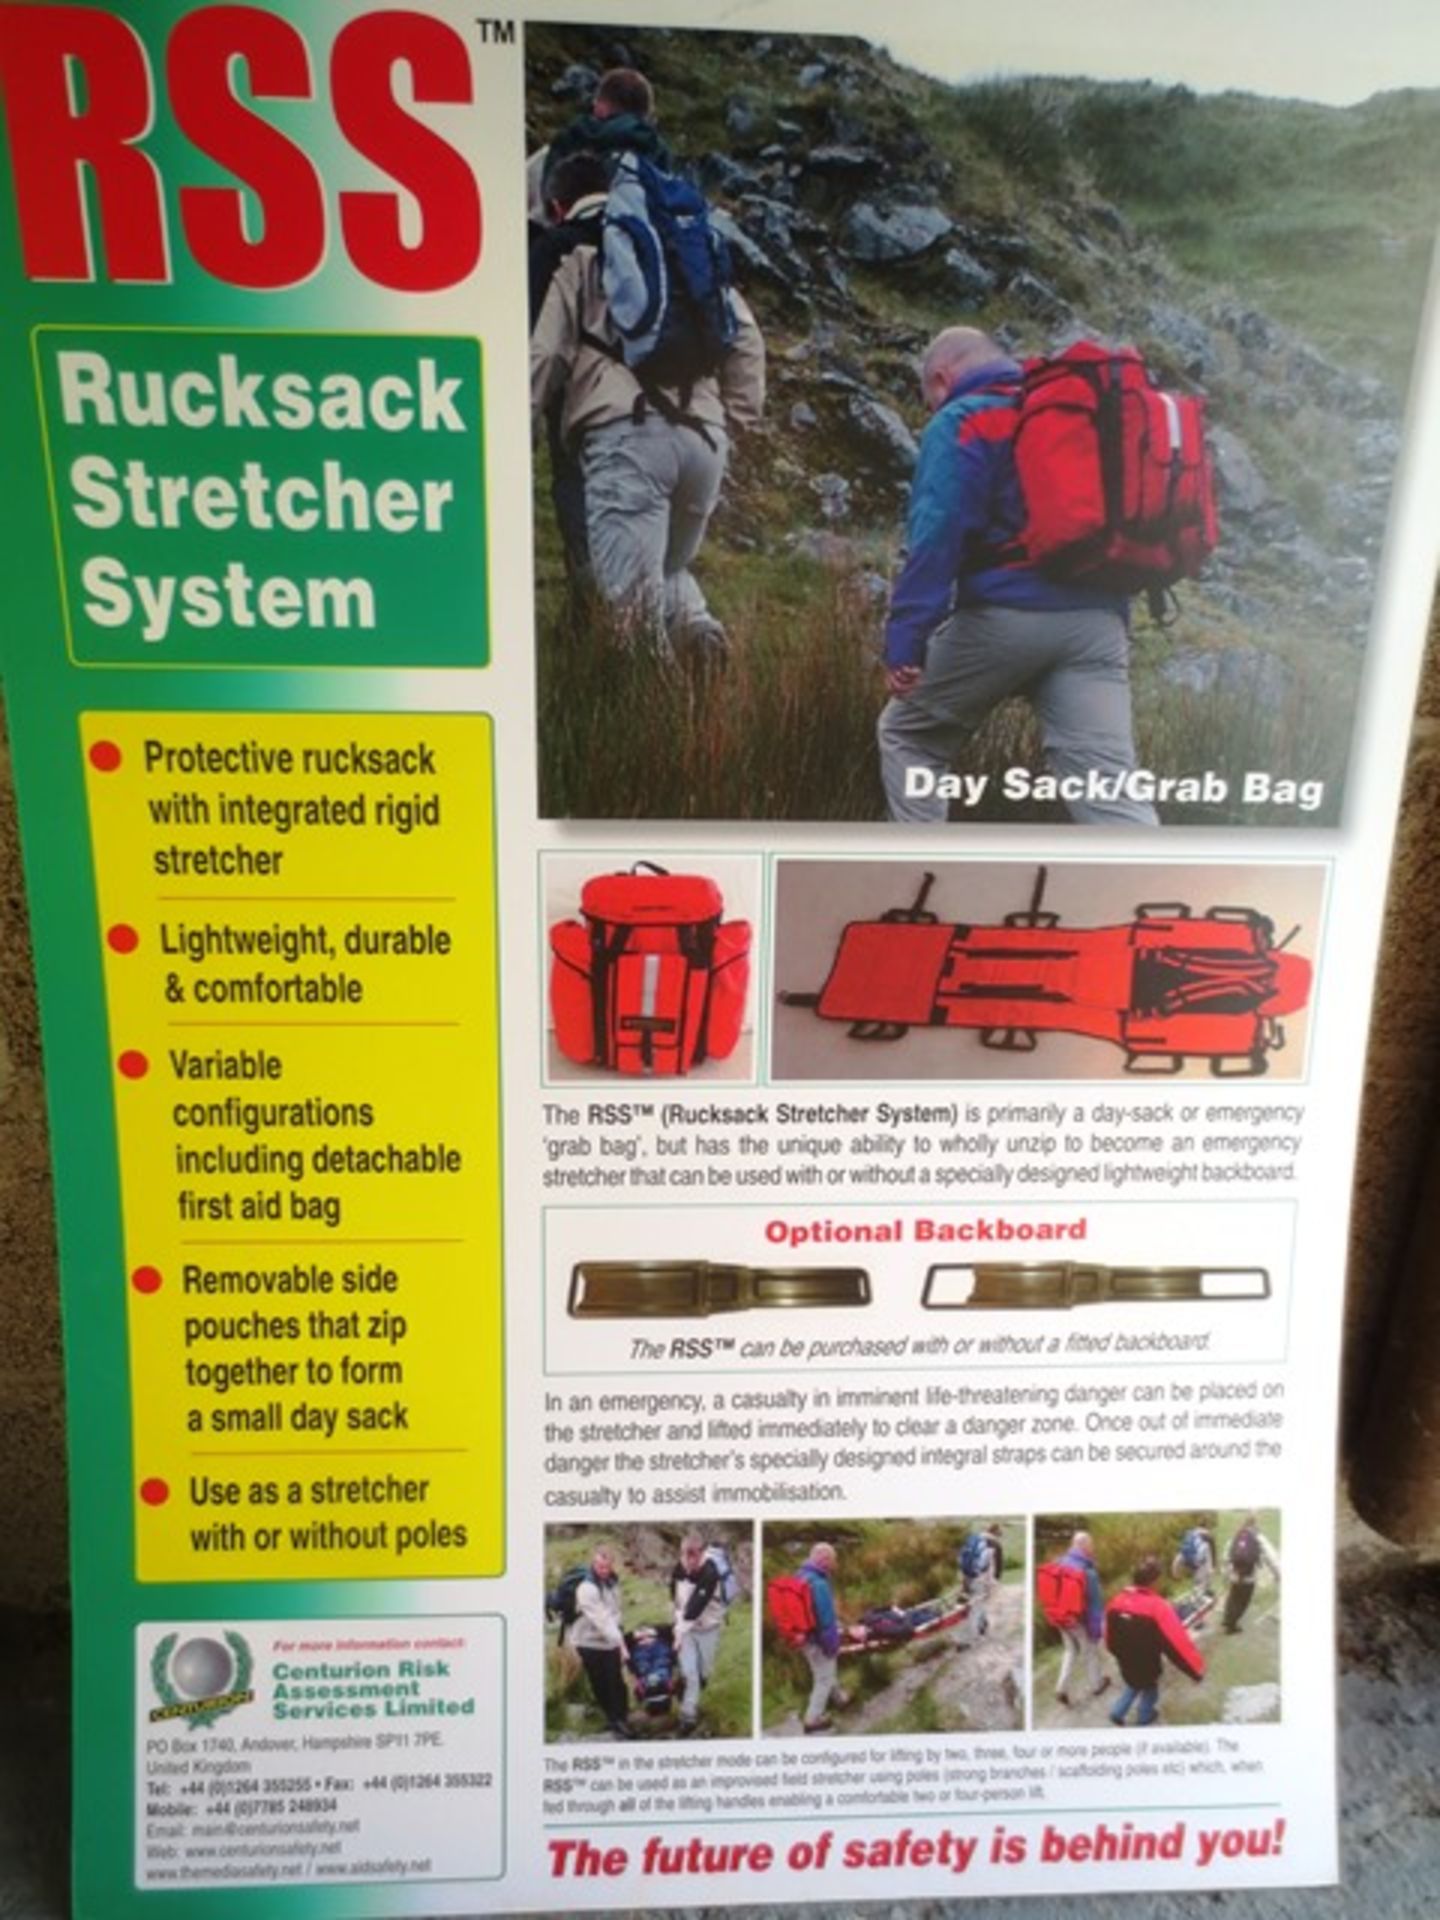 Black Rucksack Stretcher Systems (RSS) Day sack/grab bag, fold out rucksack stretcher, with - Image 8 of 9